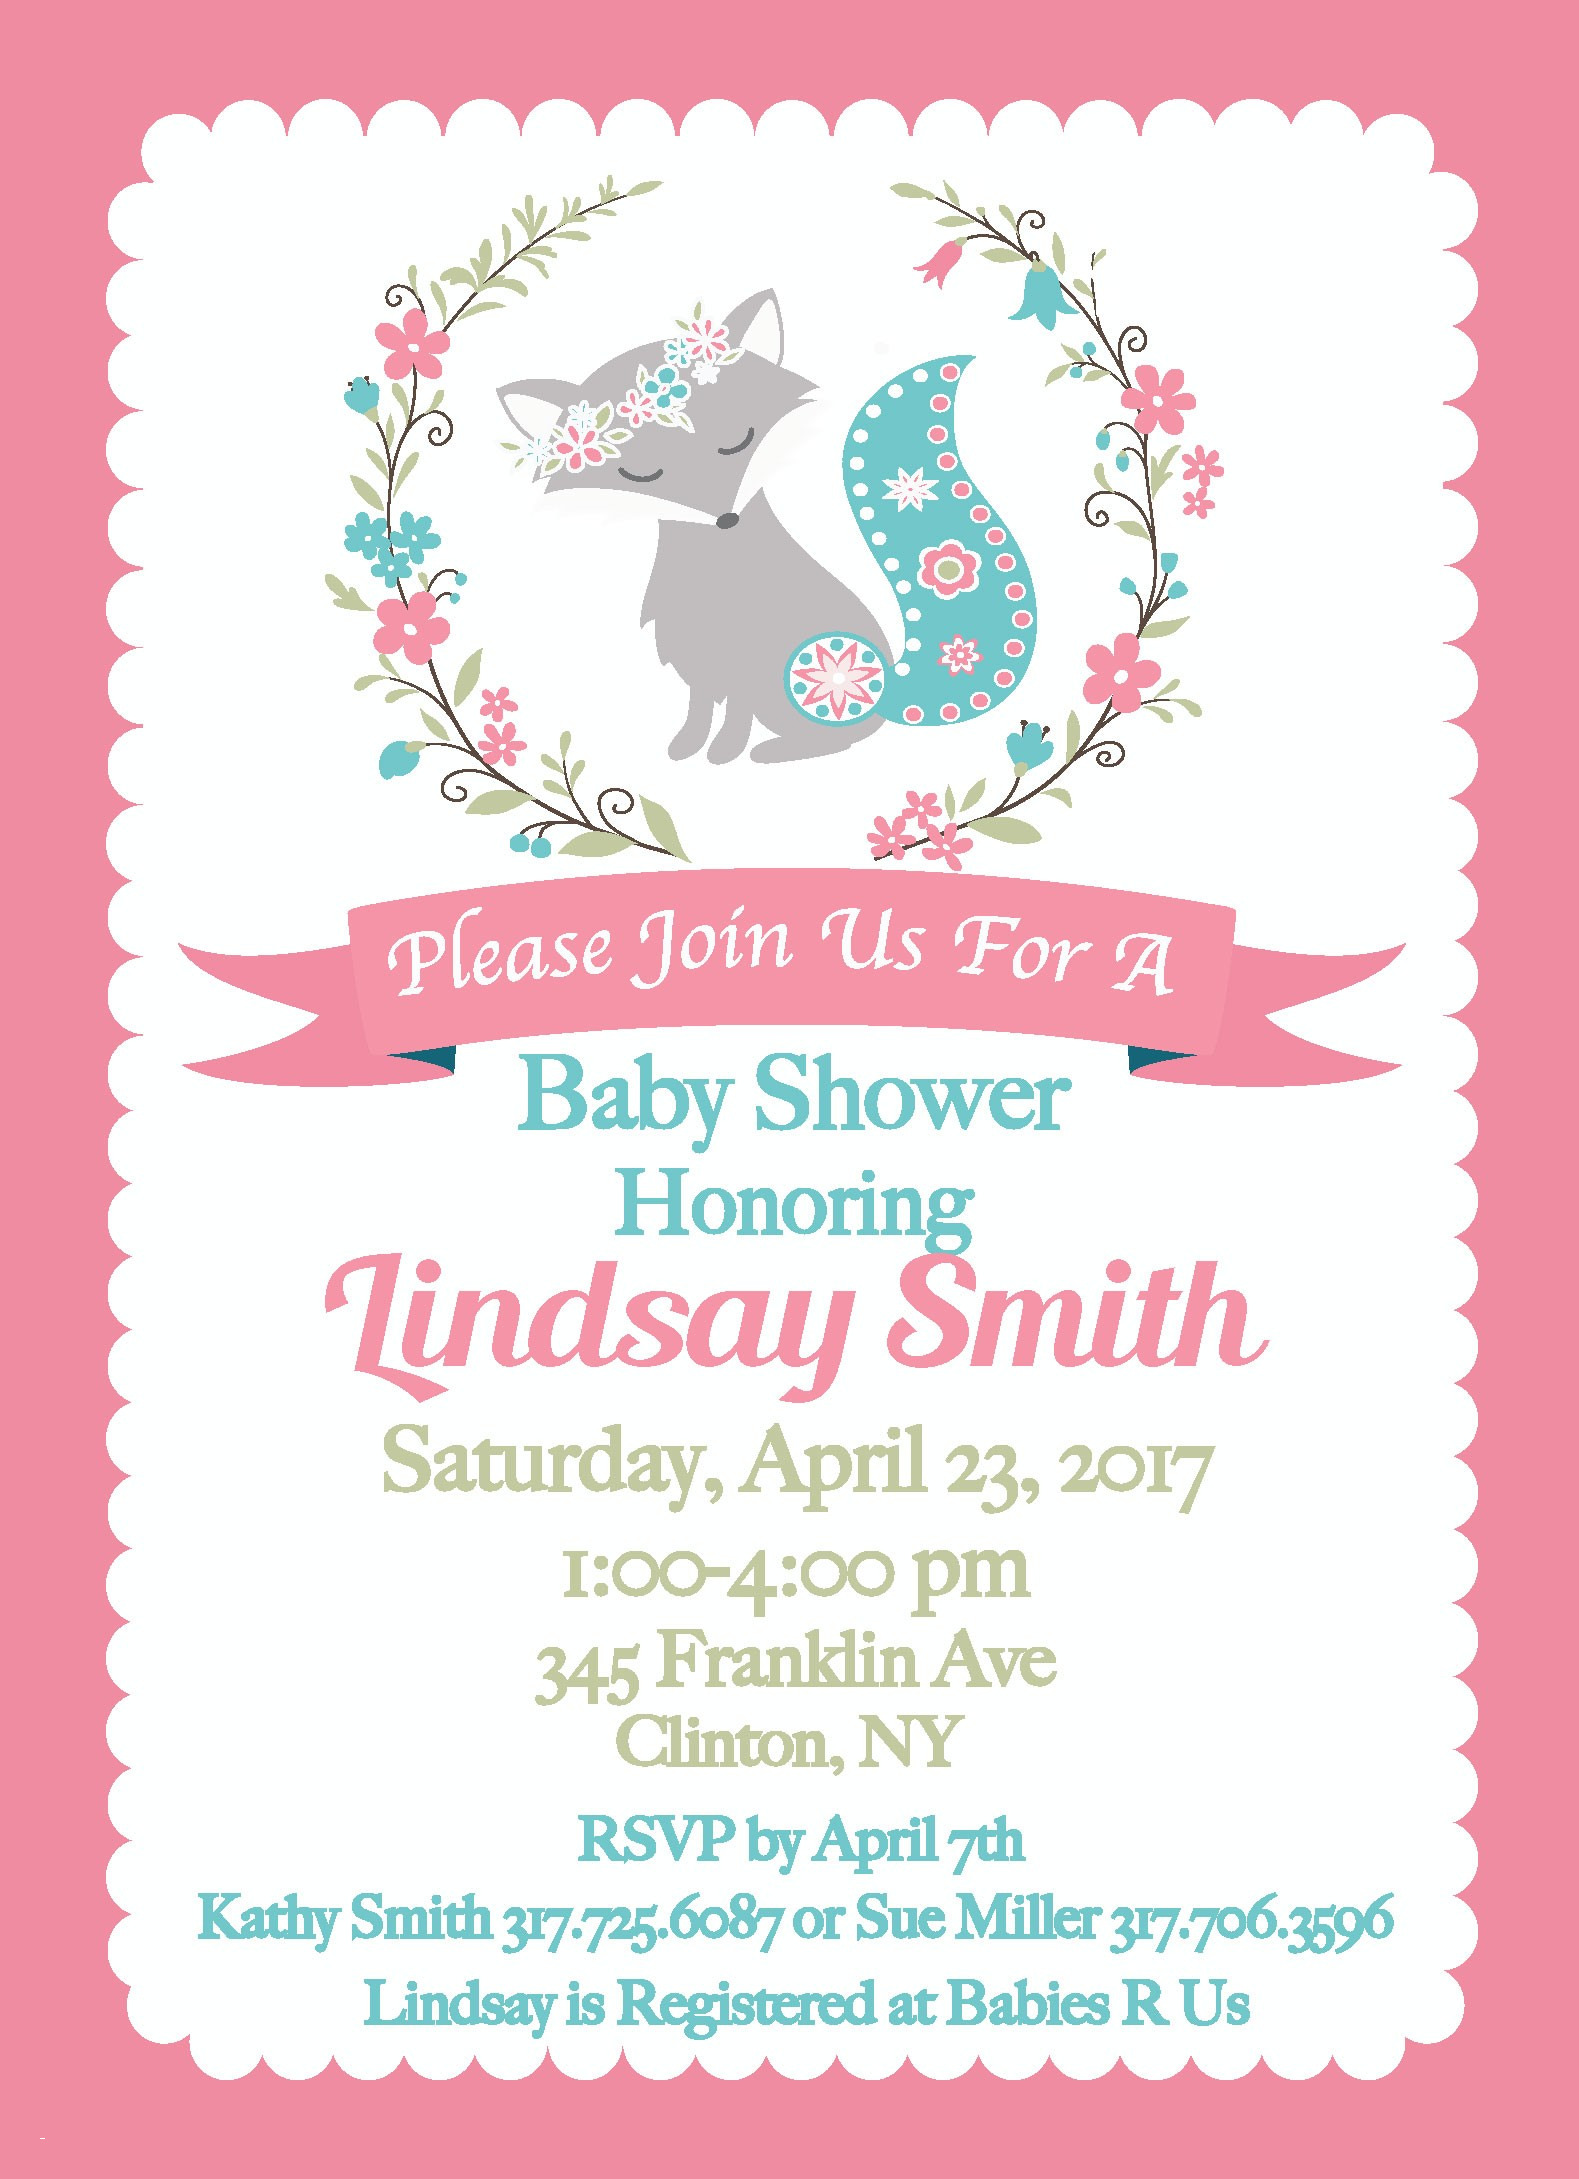 Full Size of Baby Shower:63+ Delightful Cheap Baby Shower Invitations Image Inspirations Baby Shower Gifts For Girls Arreglos Para Baby Shower Baby Shower Gift Ideas Baby Shower Wording